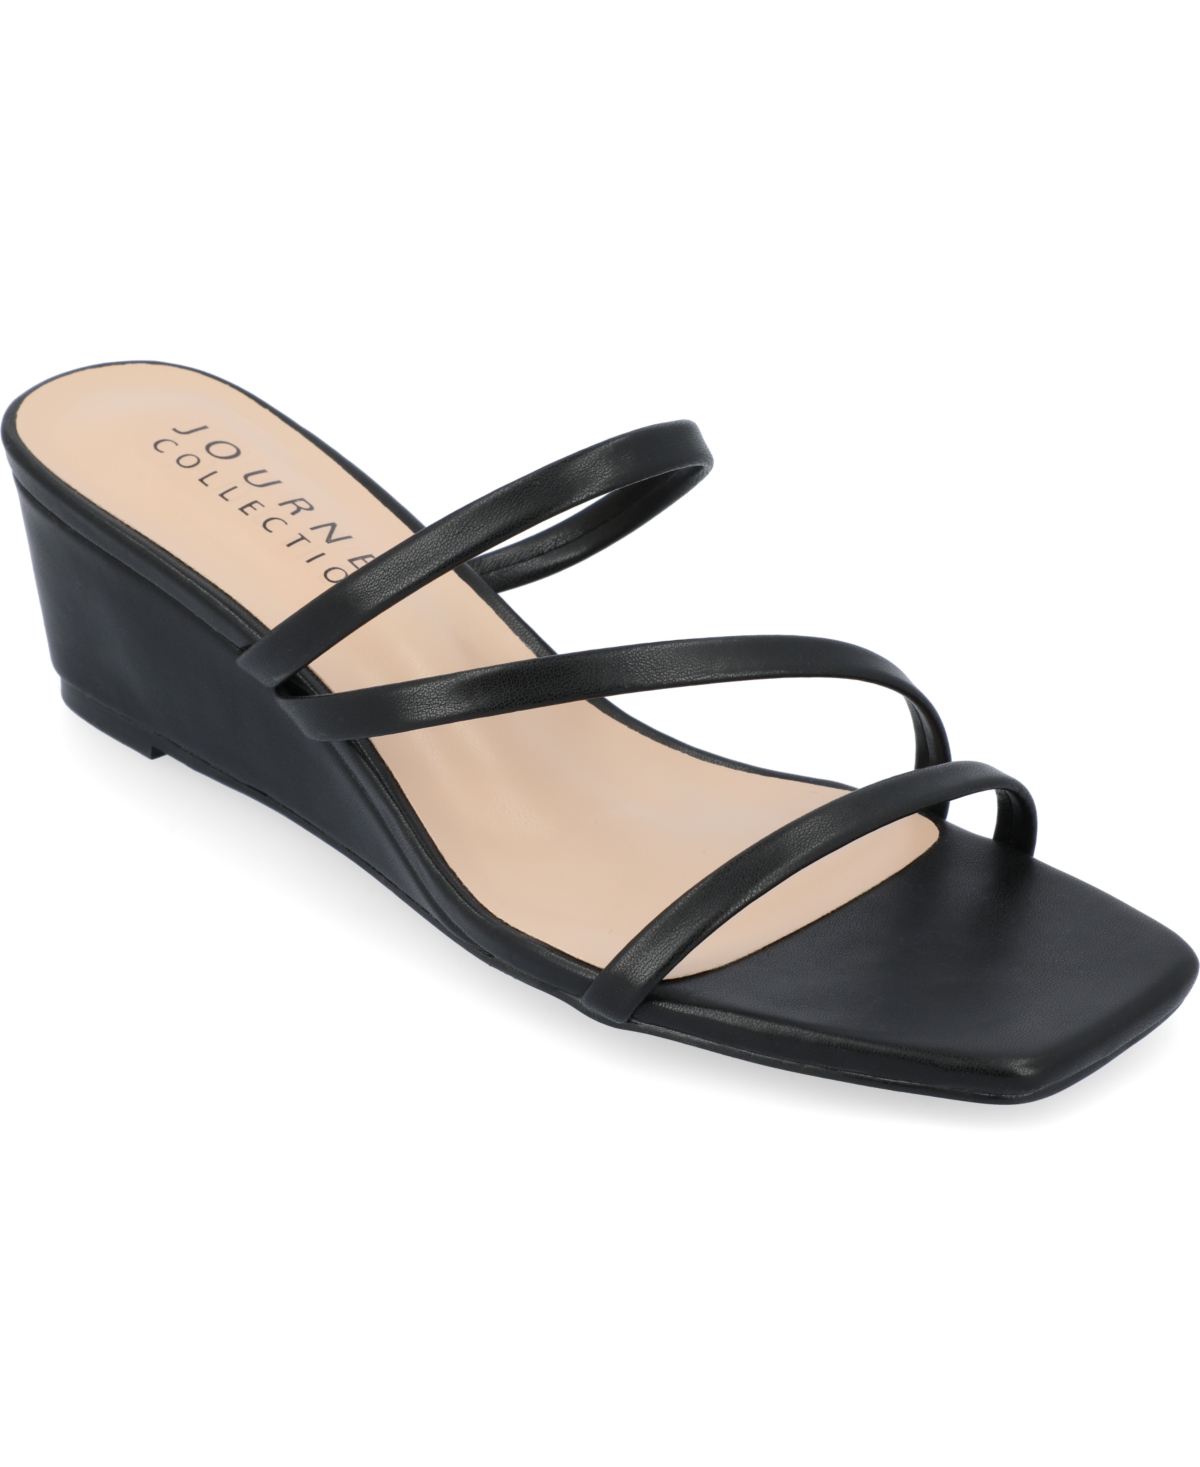 JOURNEE COLLECTION WOMEN'S TAKARAH STRAPPY ASYMMETRICAL WEDGE SANDALS